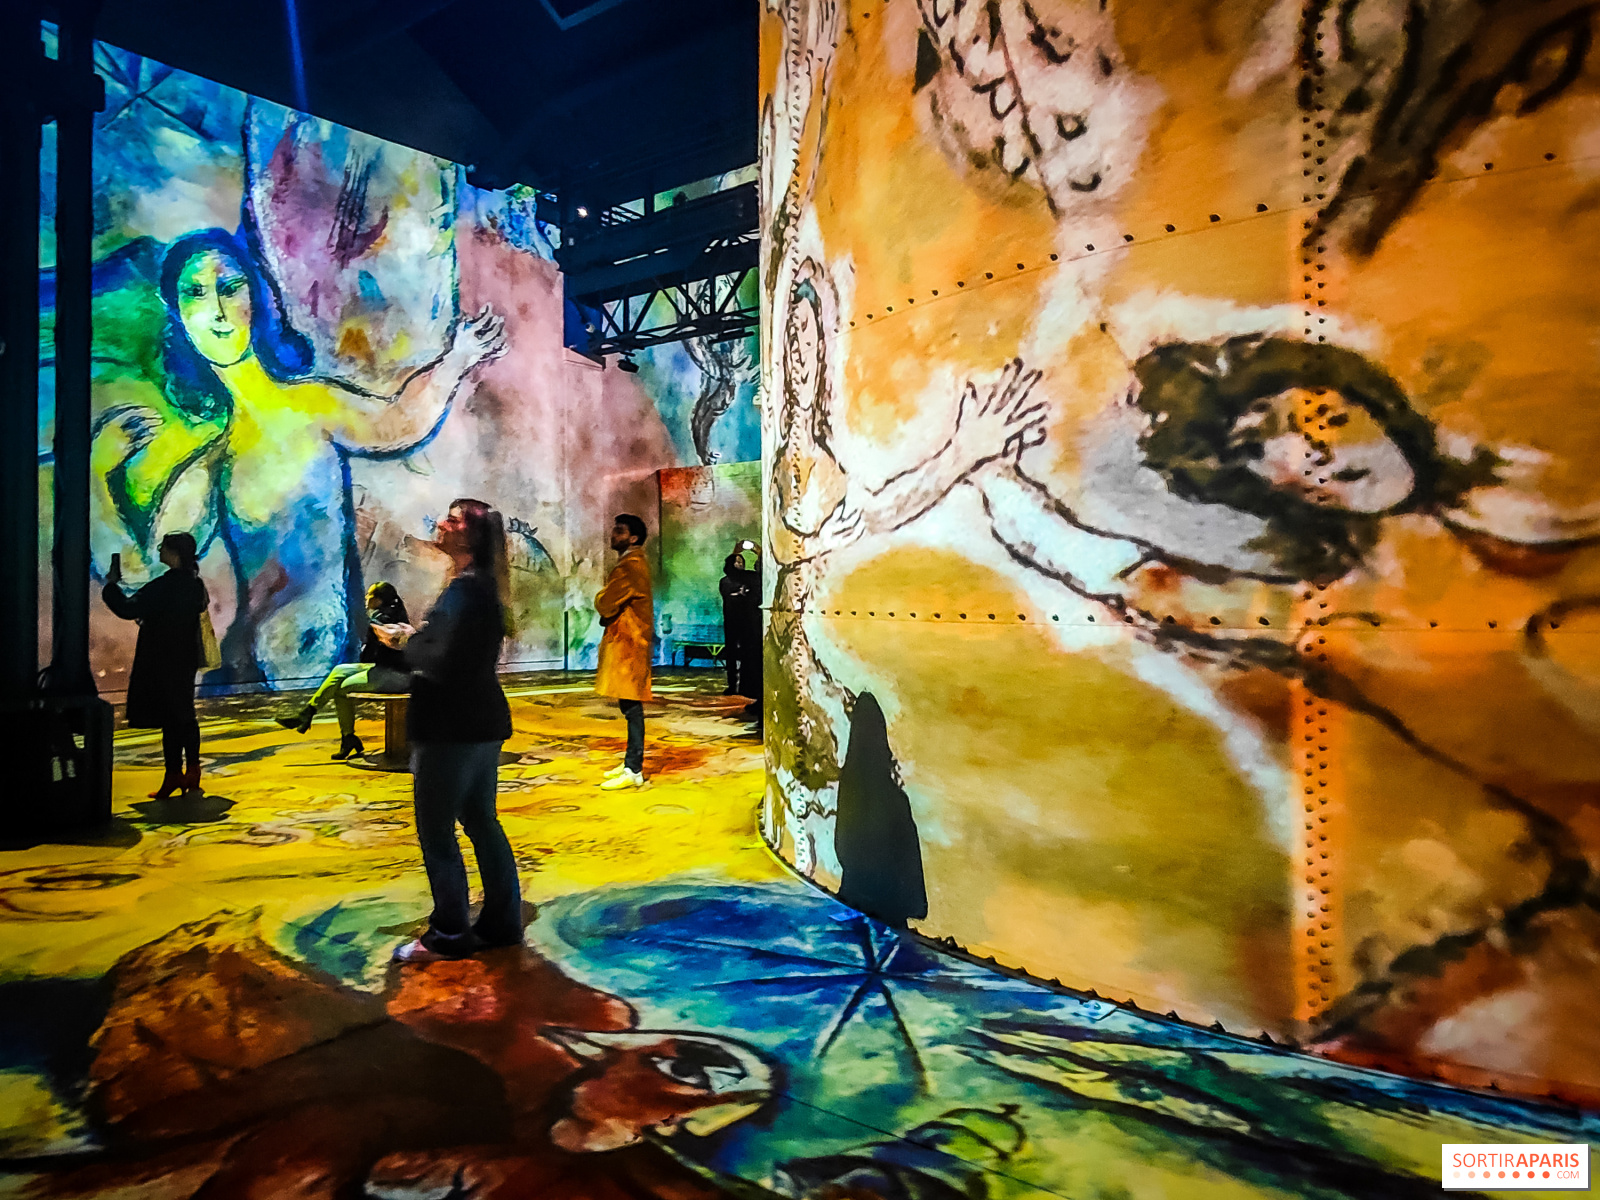 There Is Now a Permanent Immersive Art Space in New York City